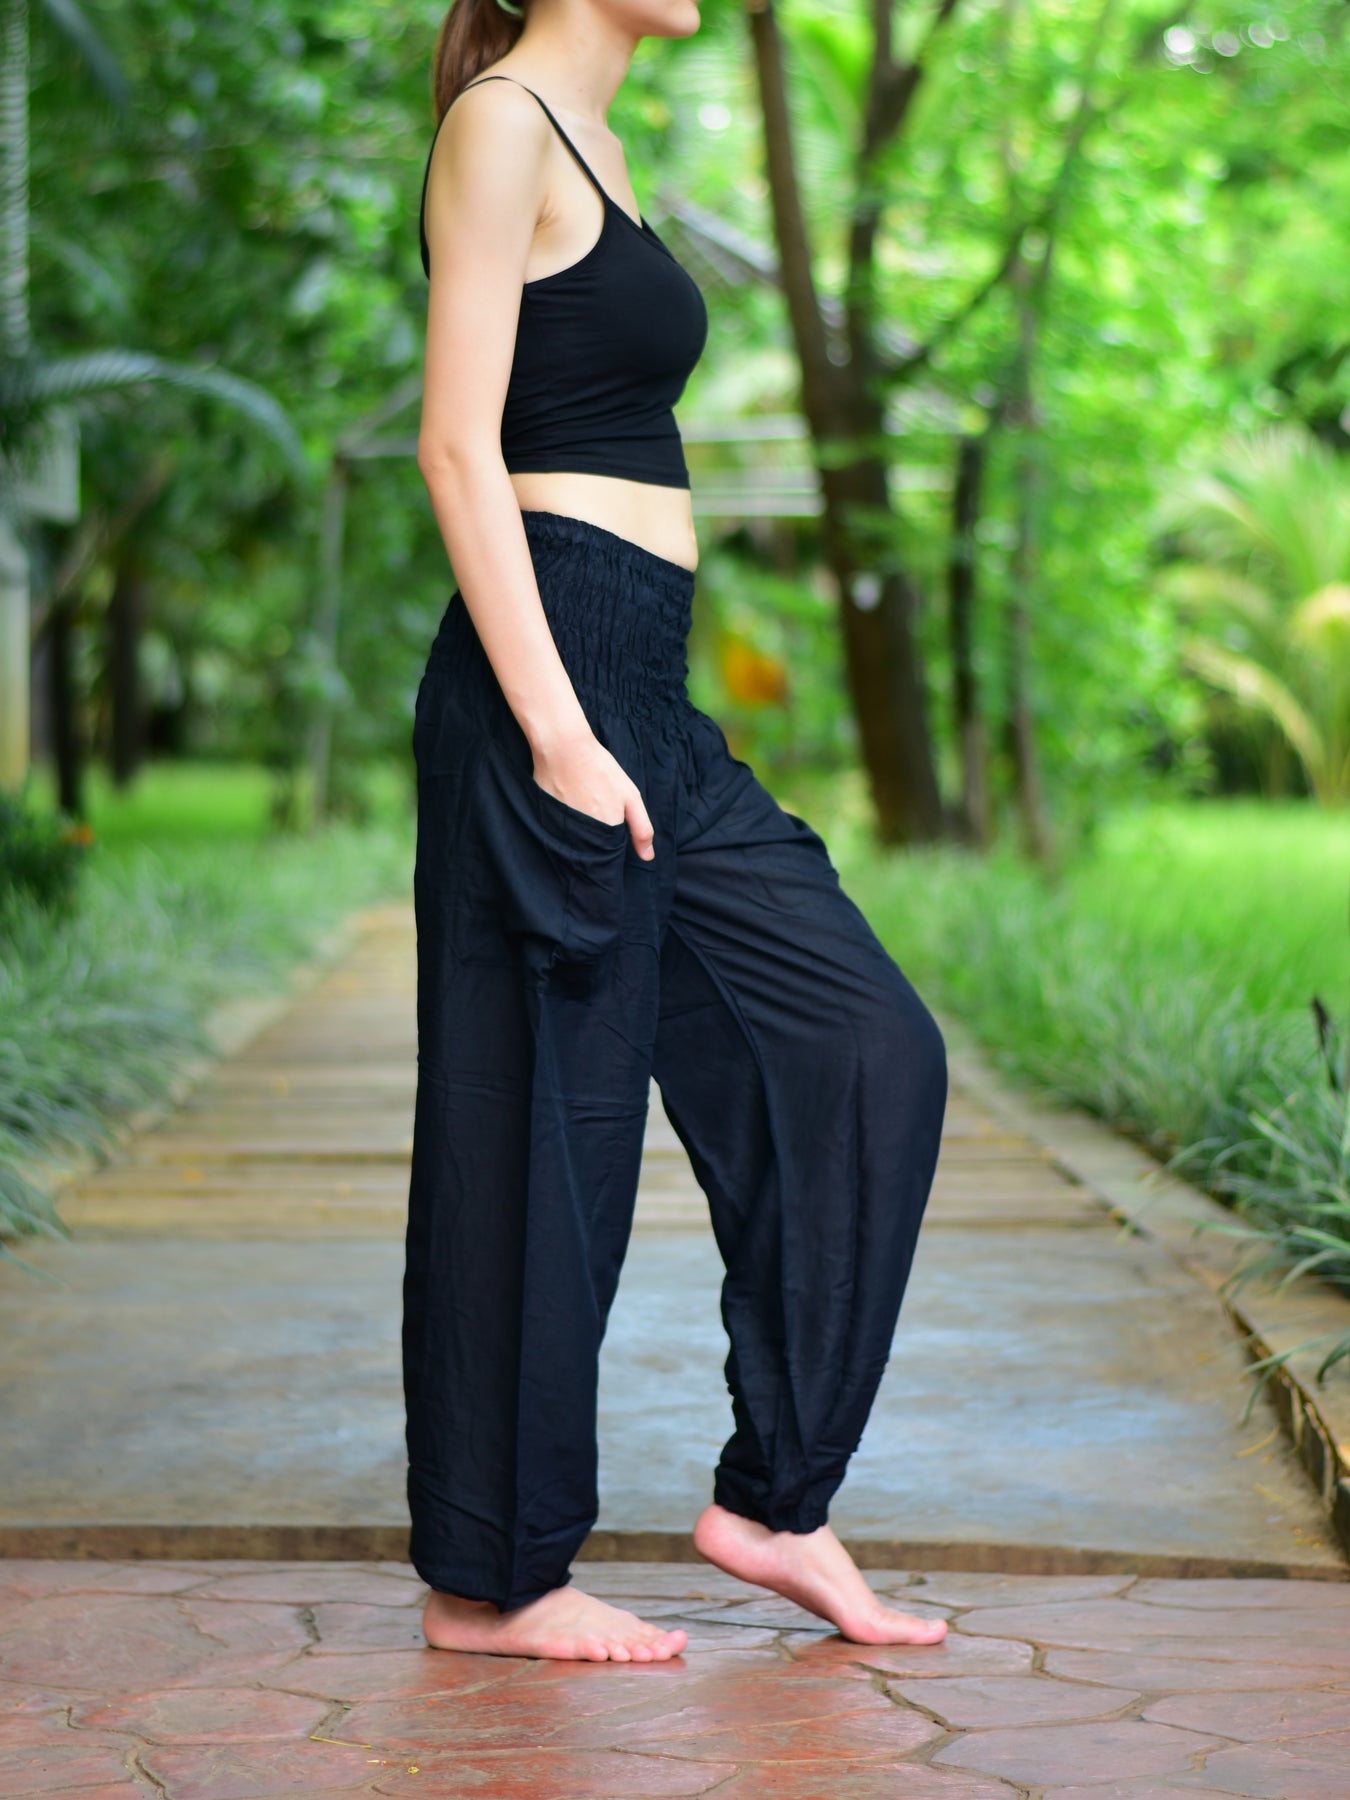 Buy Online Teal Viscose Polyester Jogger Pants for Women & Girls at Best  Prices in Biba India-ATHLEI